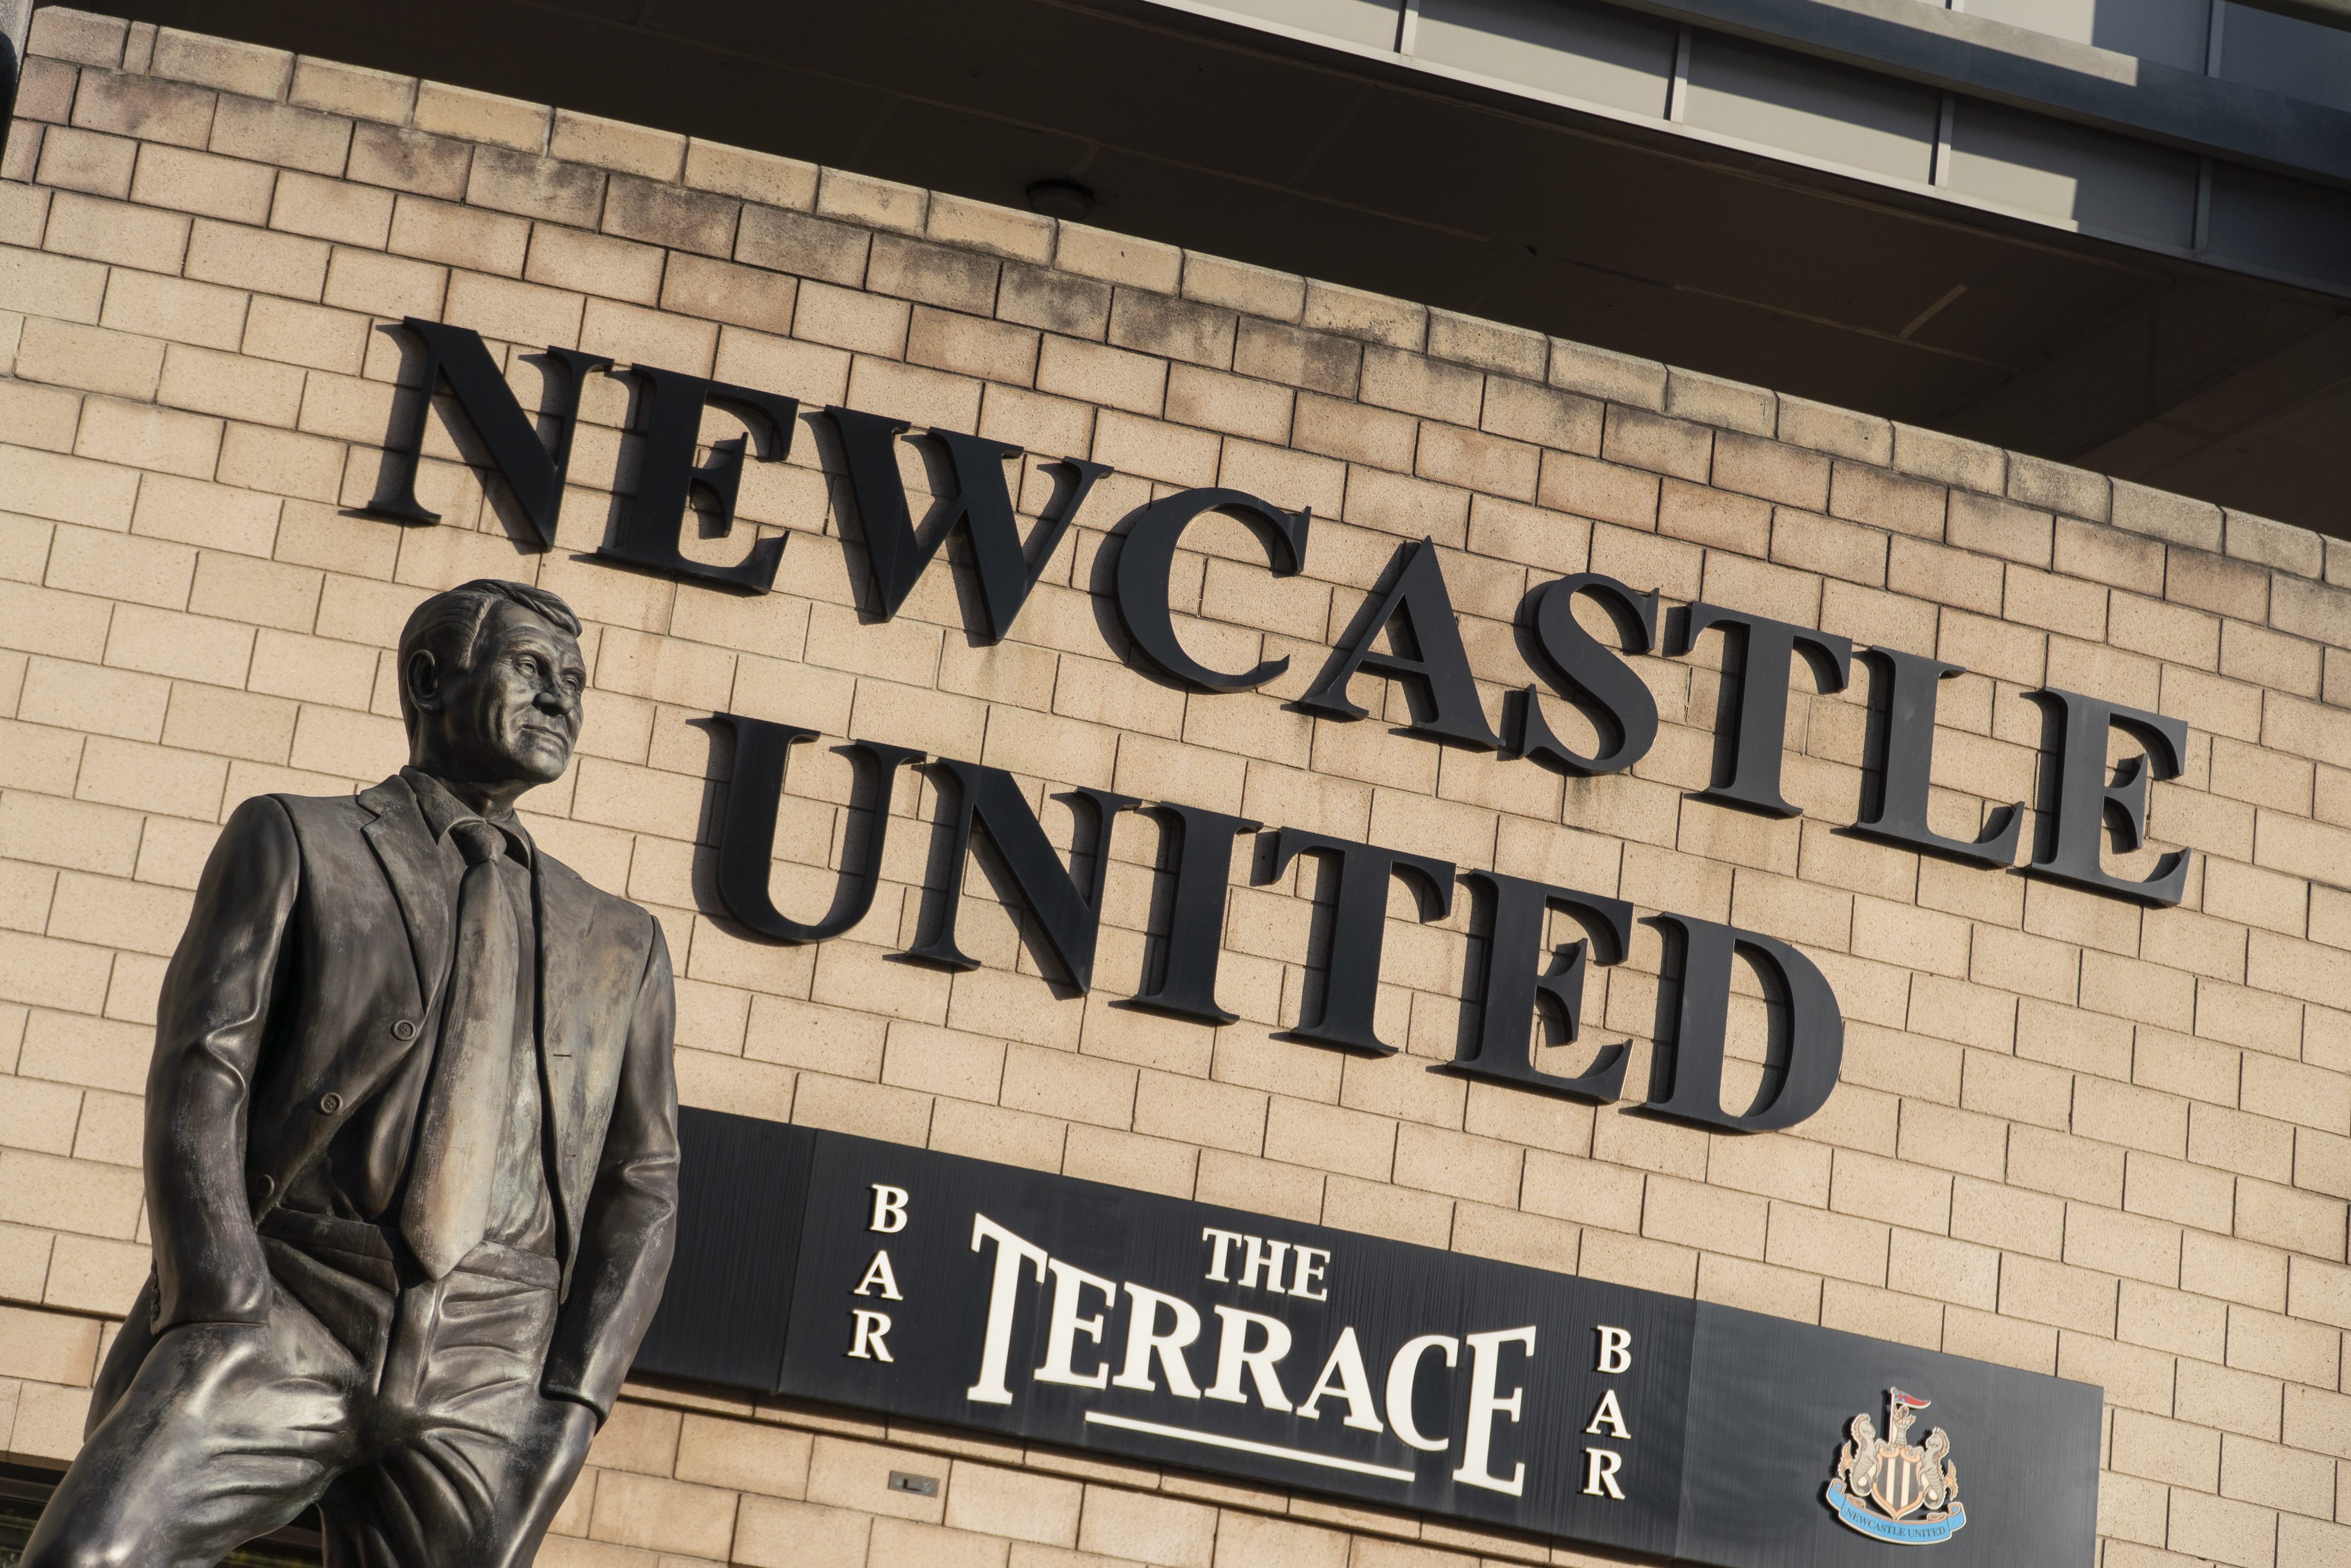 Image of Newcastle United sign outside of the St James' Park stadium with statue of Sir Bobby Robson in the foreground